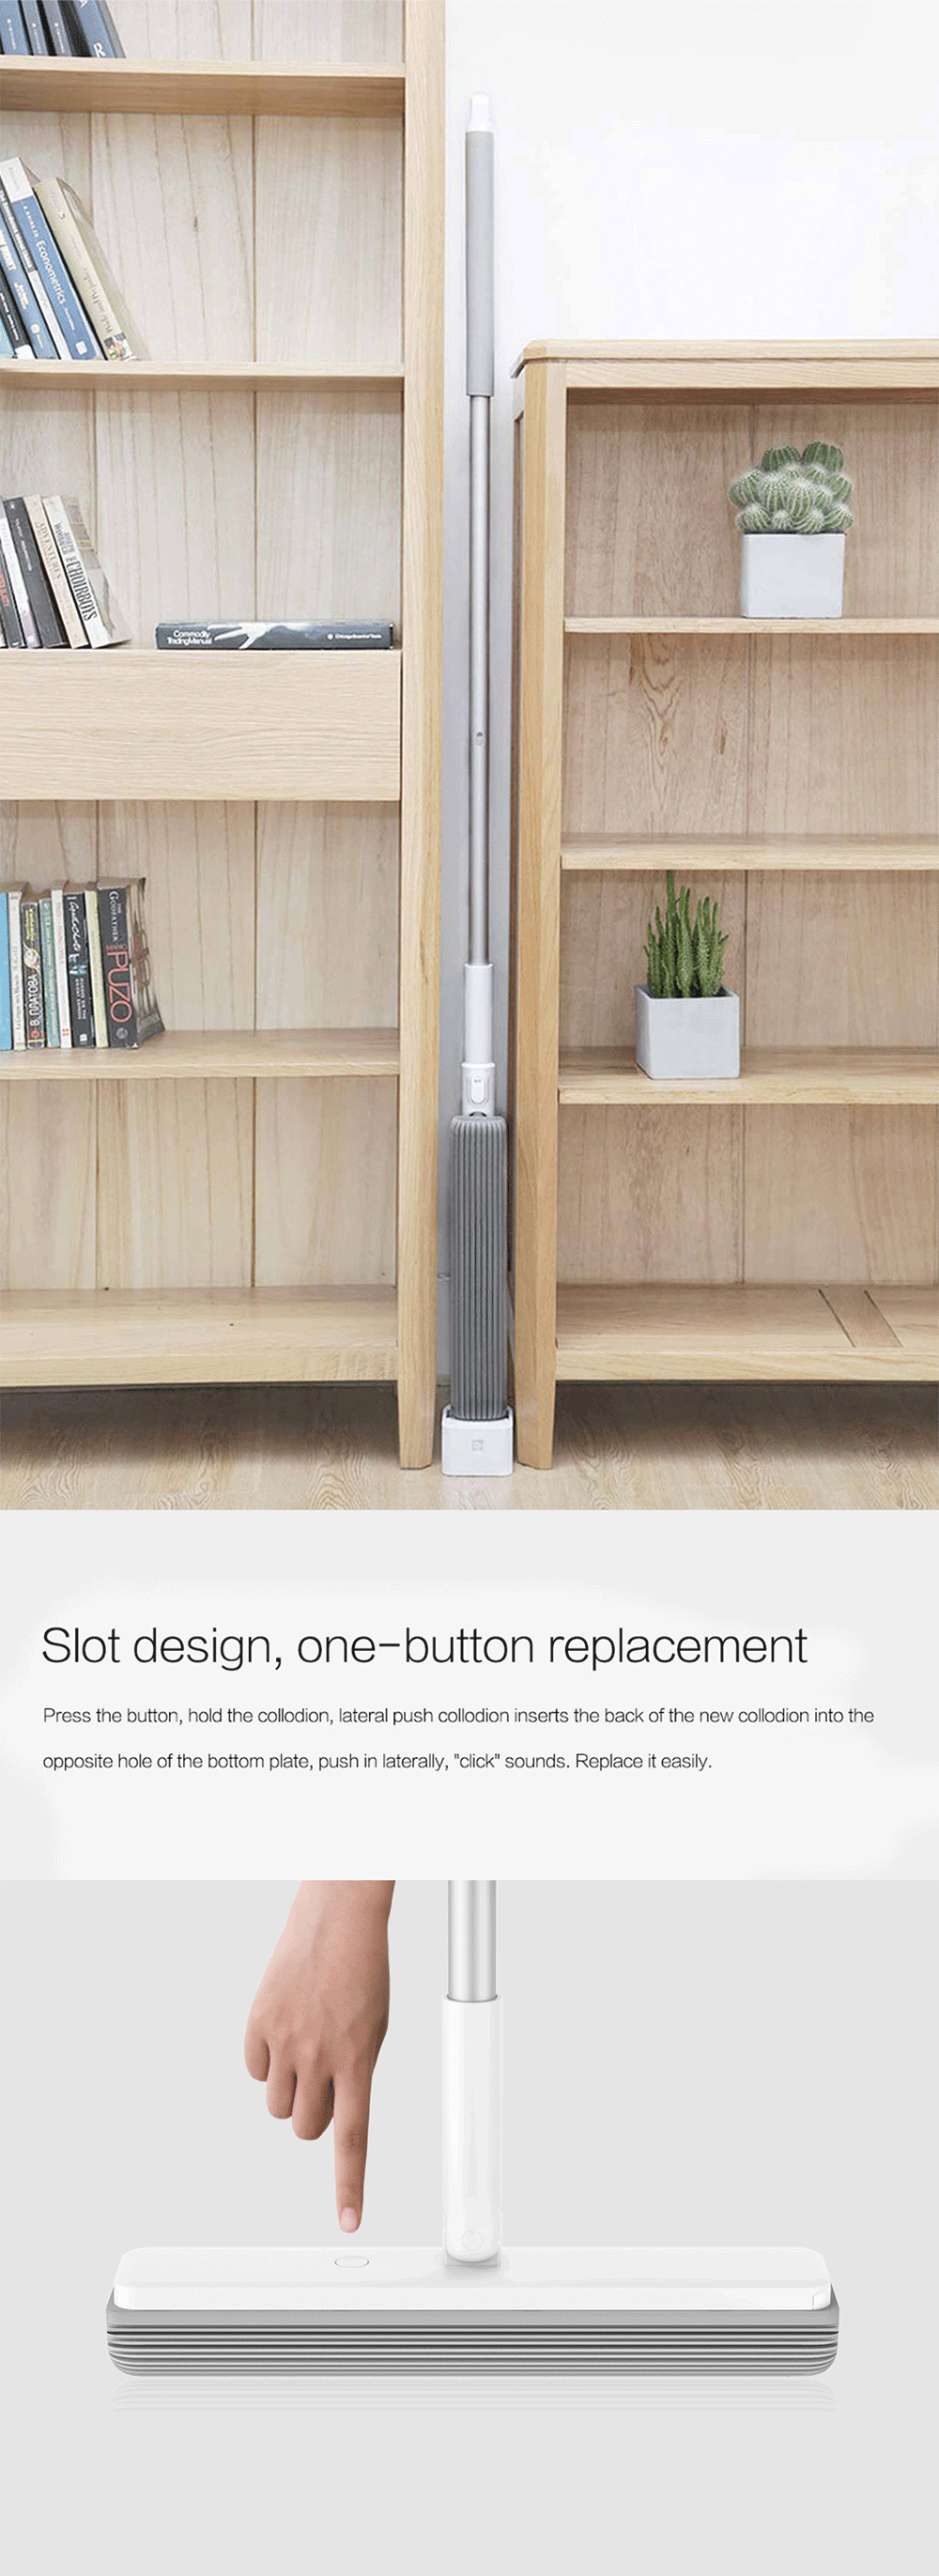 180-degree Rotating Standing Storage Space-saving Mop with Collodion Head from Xiaomi Youpin